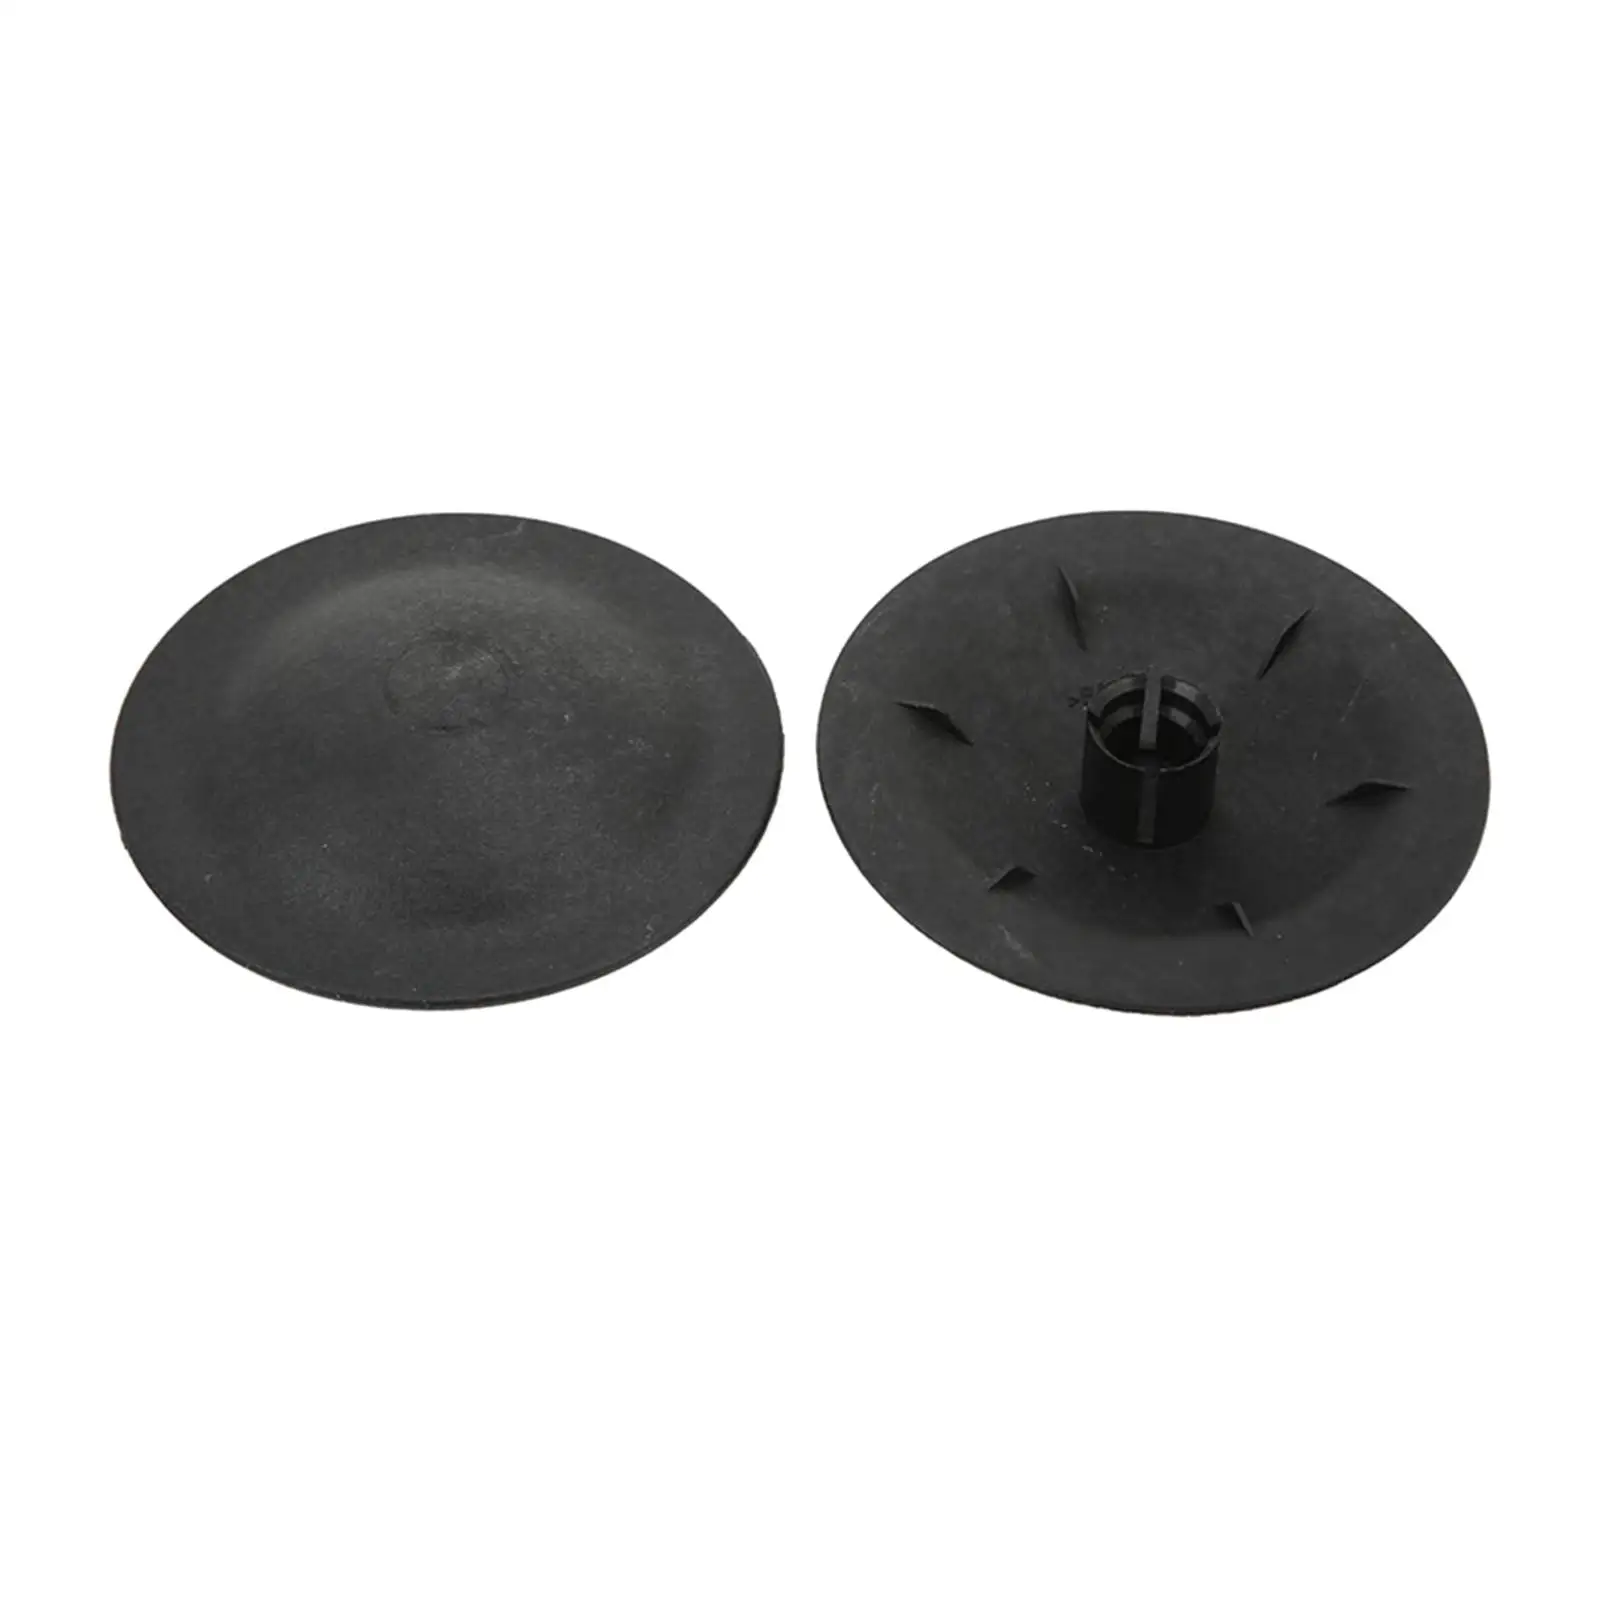 2x Top Shock Absorber Mount Cover Caps 51938656 Shock Absorption Protection Protector Sound Insulation Parts for 